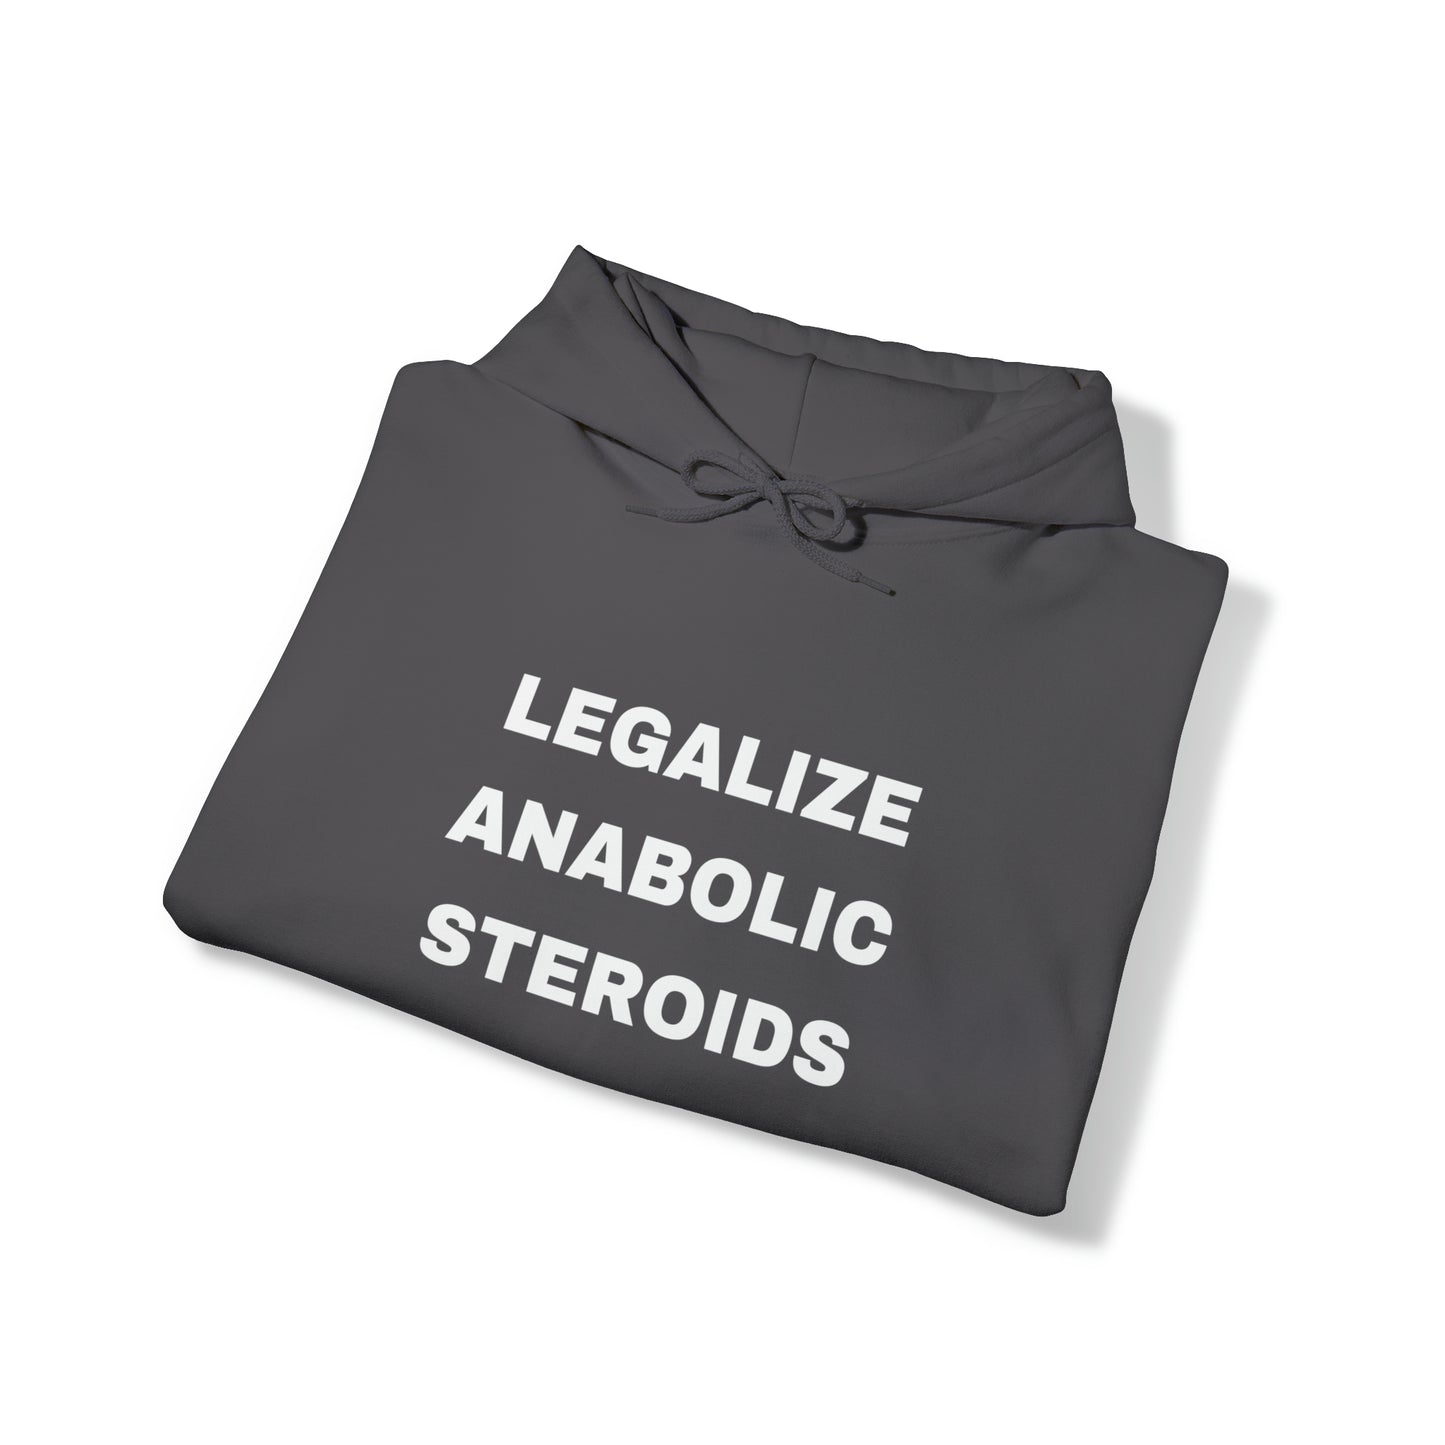 Legalize Anabolic Steroids Hoodie